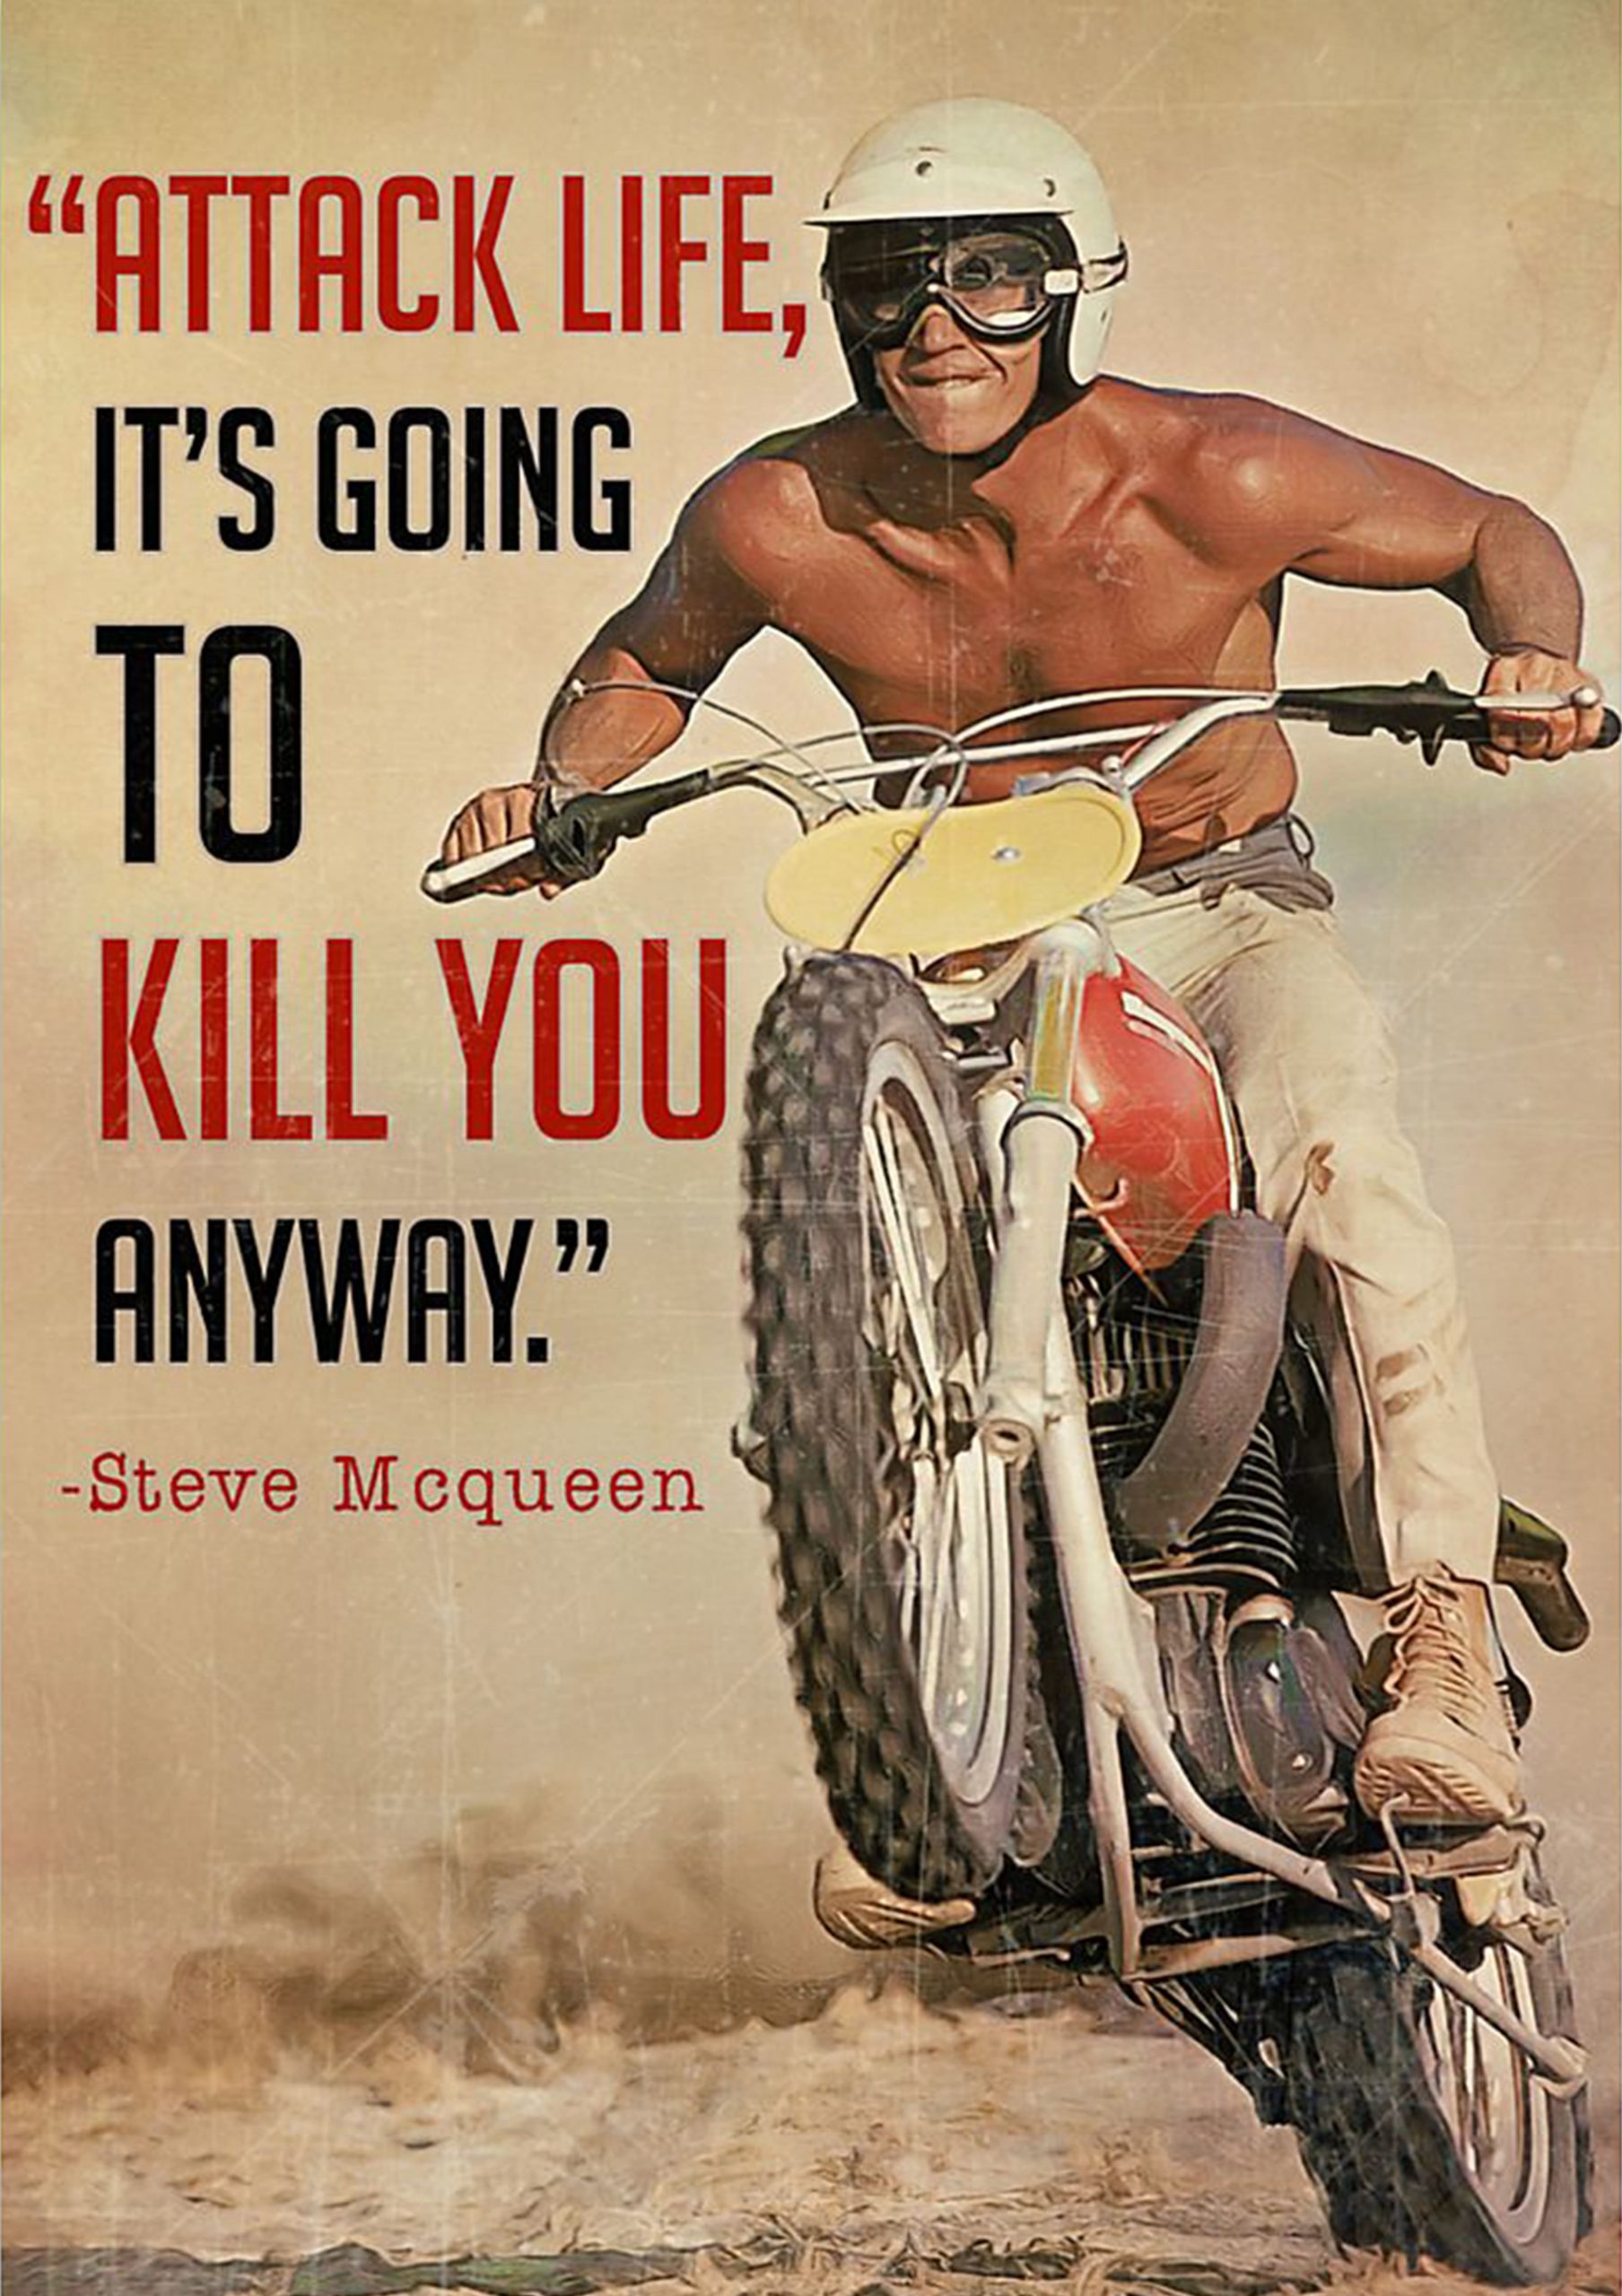 vintage attack life its going to kill you anyway poster 1 - Copy